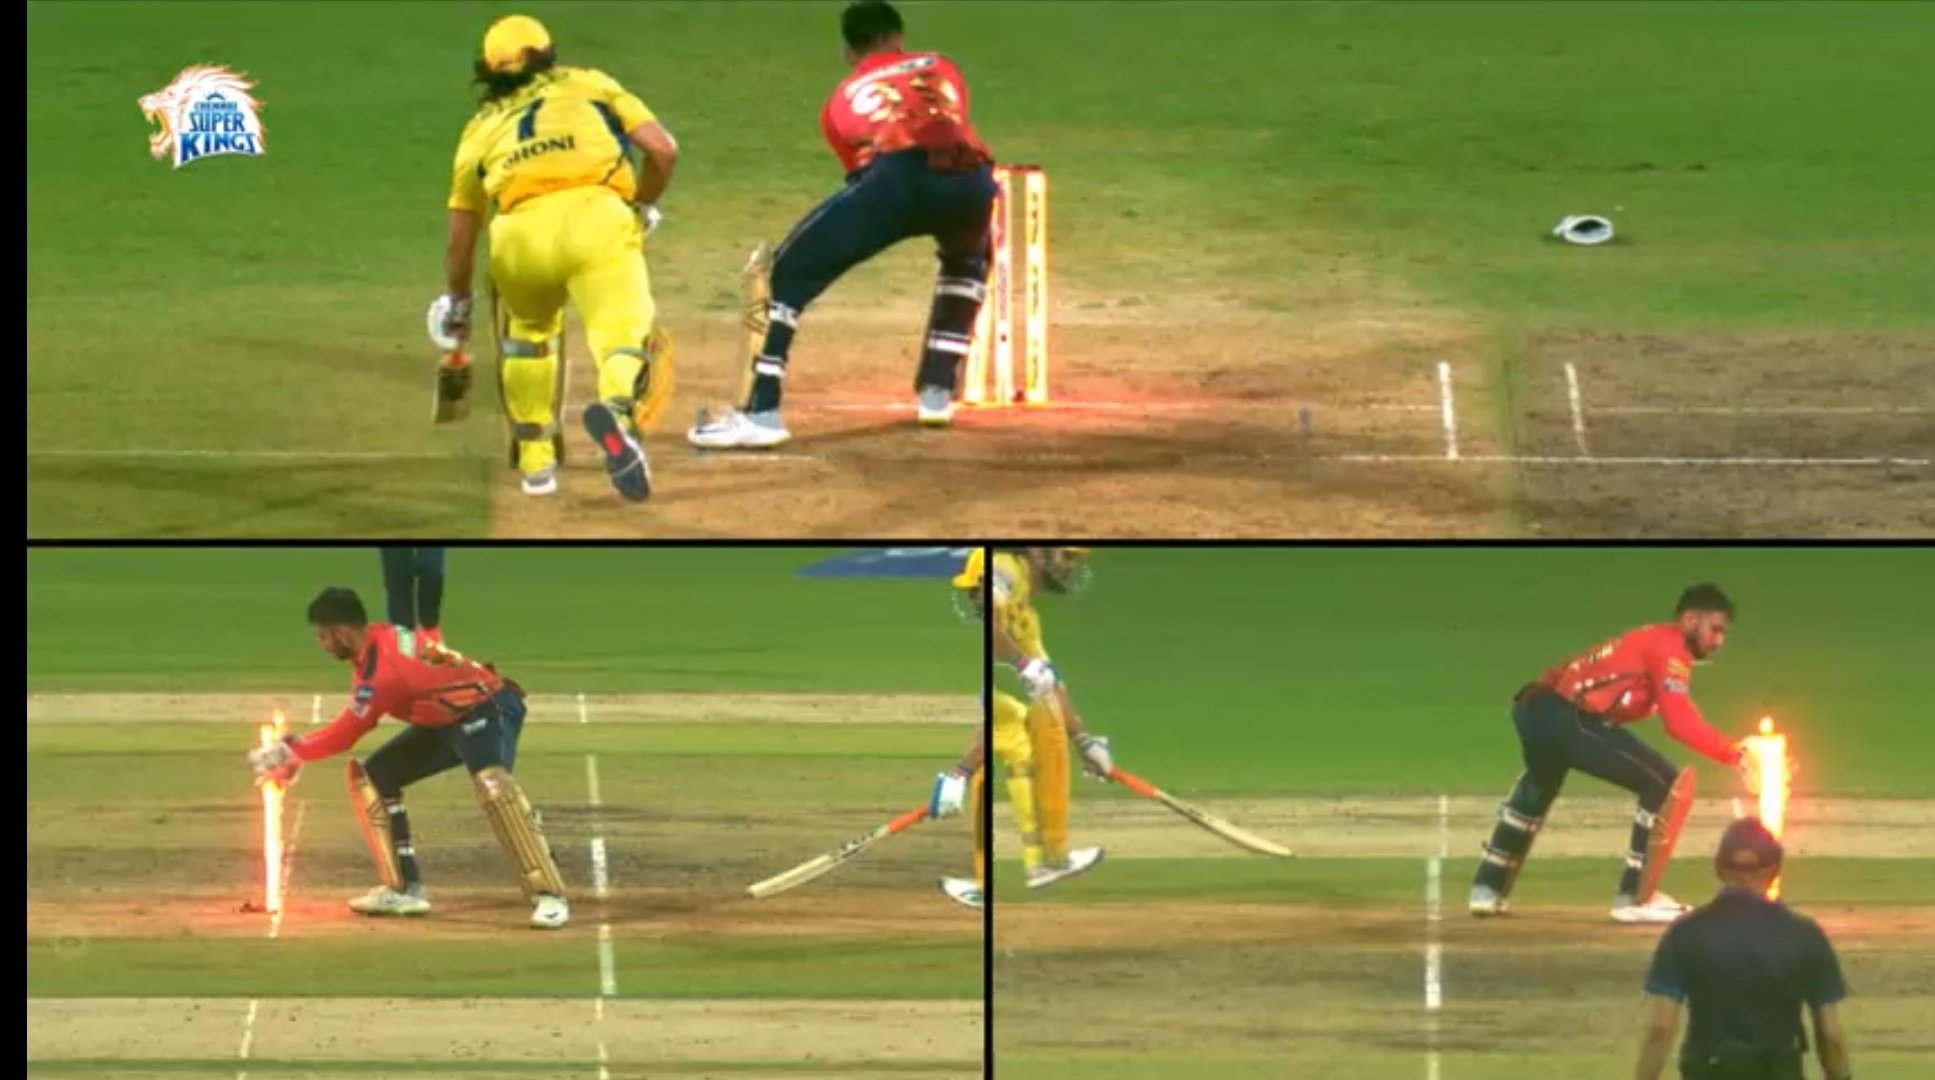 PBKS’ Viral Post: ‘Thala For A Reason’ on MS Dhoni’s Run-Out